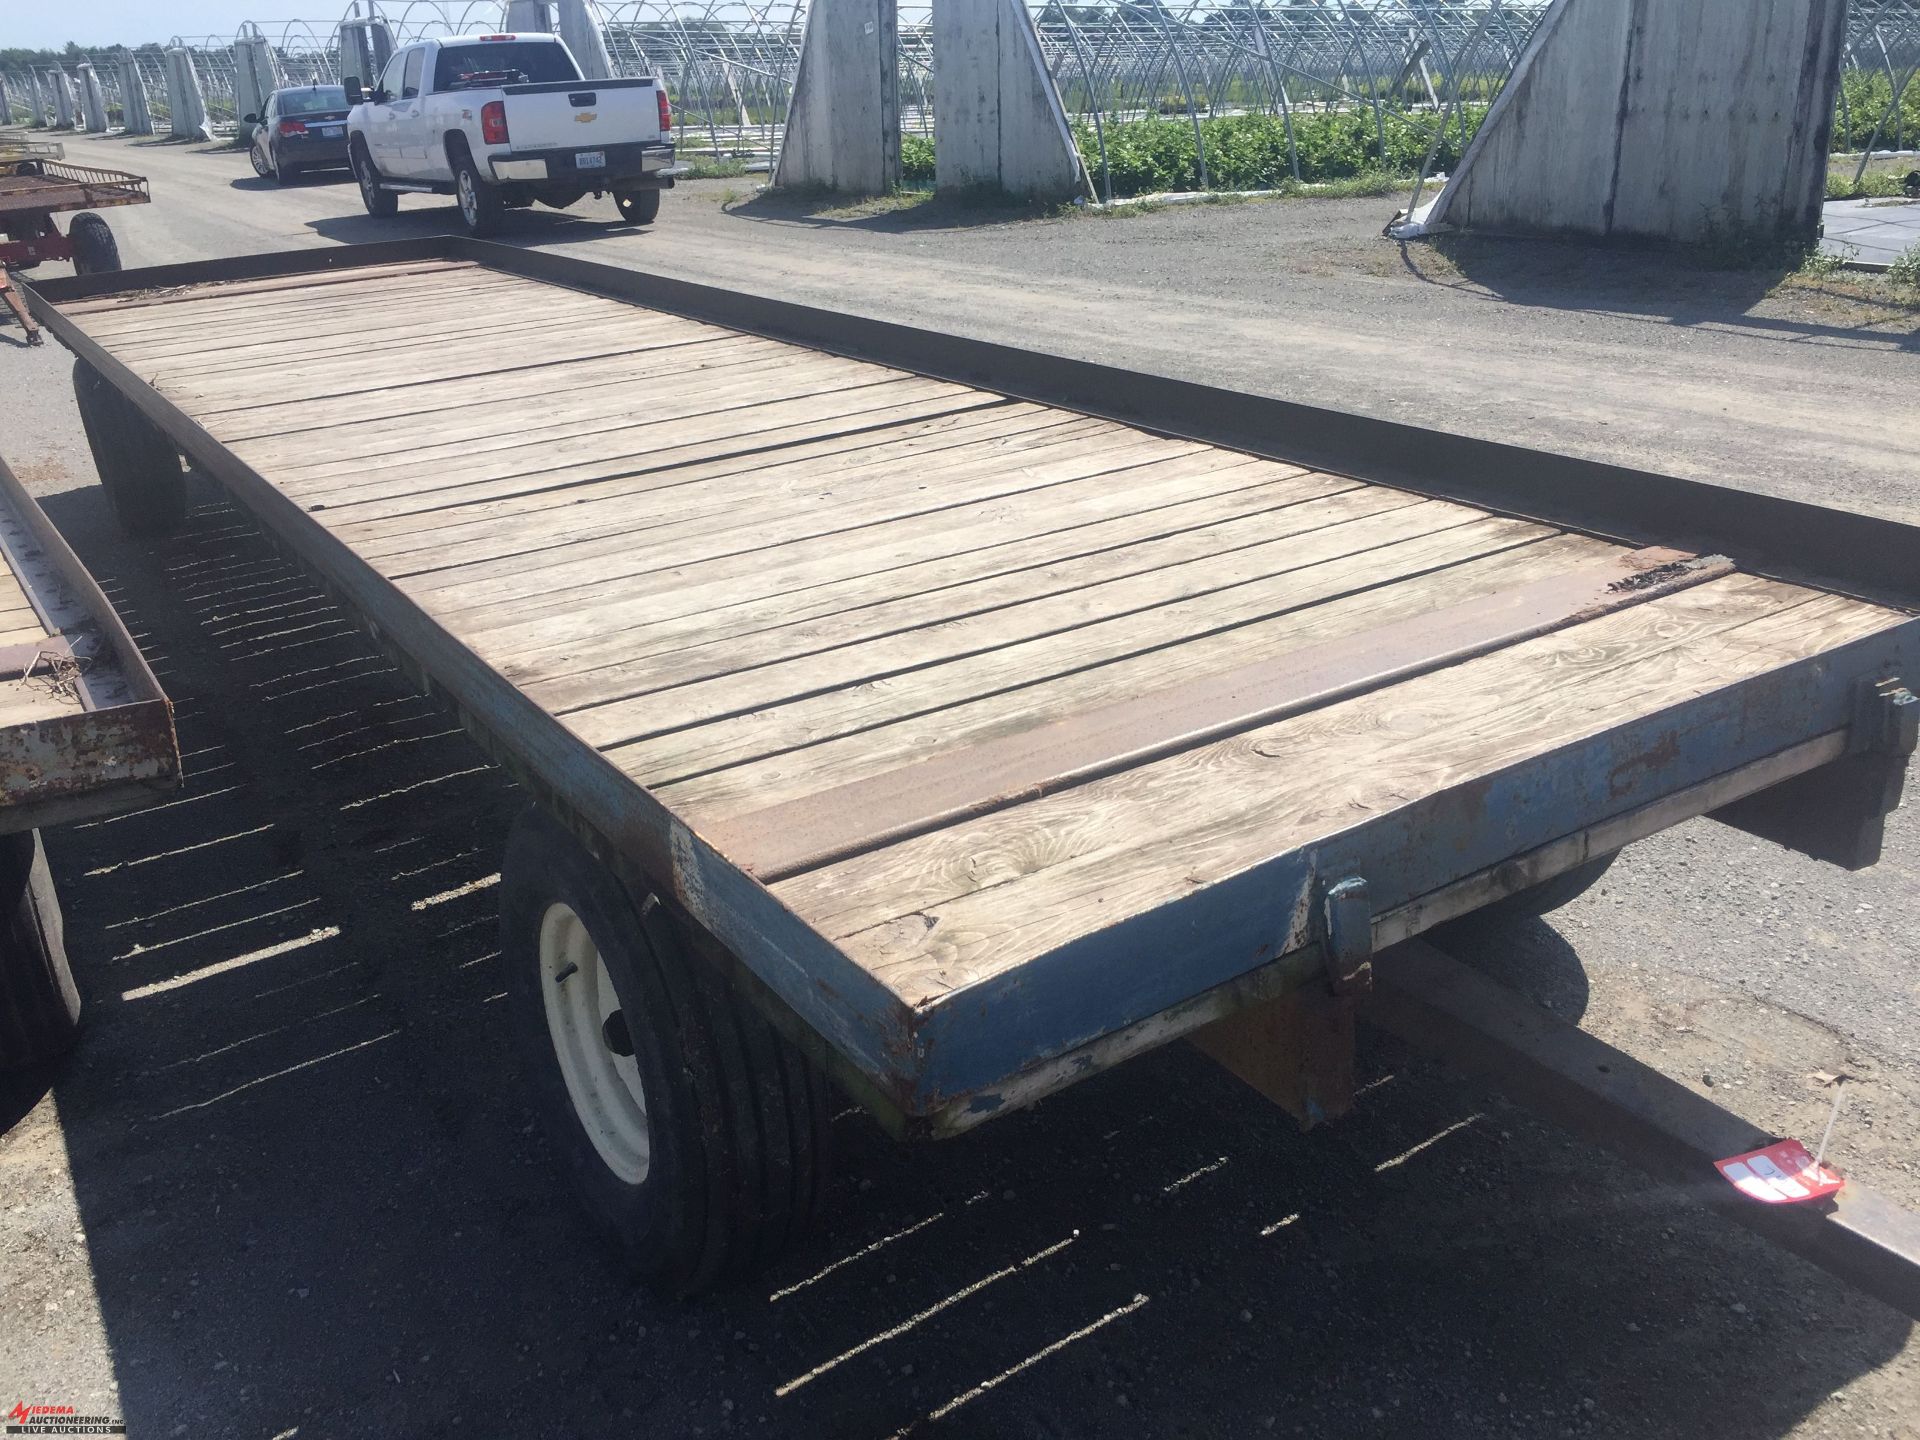 KNOWLES FLATBED WAGON, 6' WIDE x 24' LONG, FOR FARM USE ONLY [LOCATION: FILLMORE STREET FACILITY]